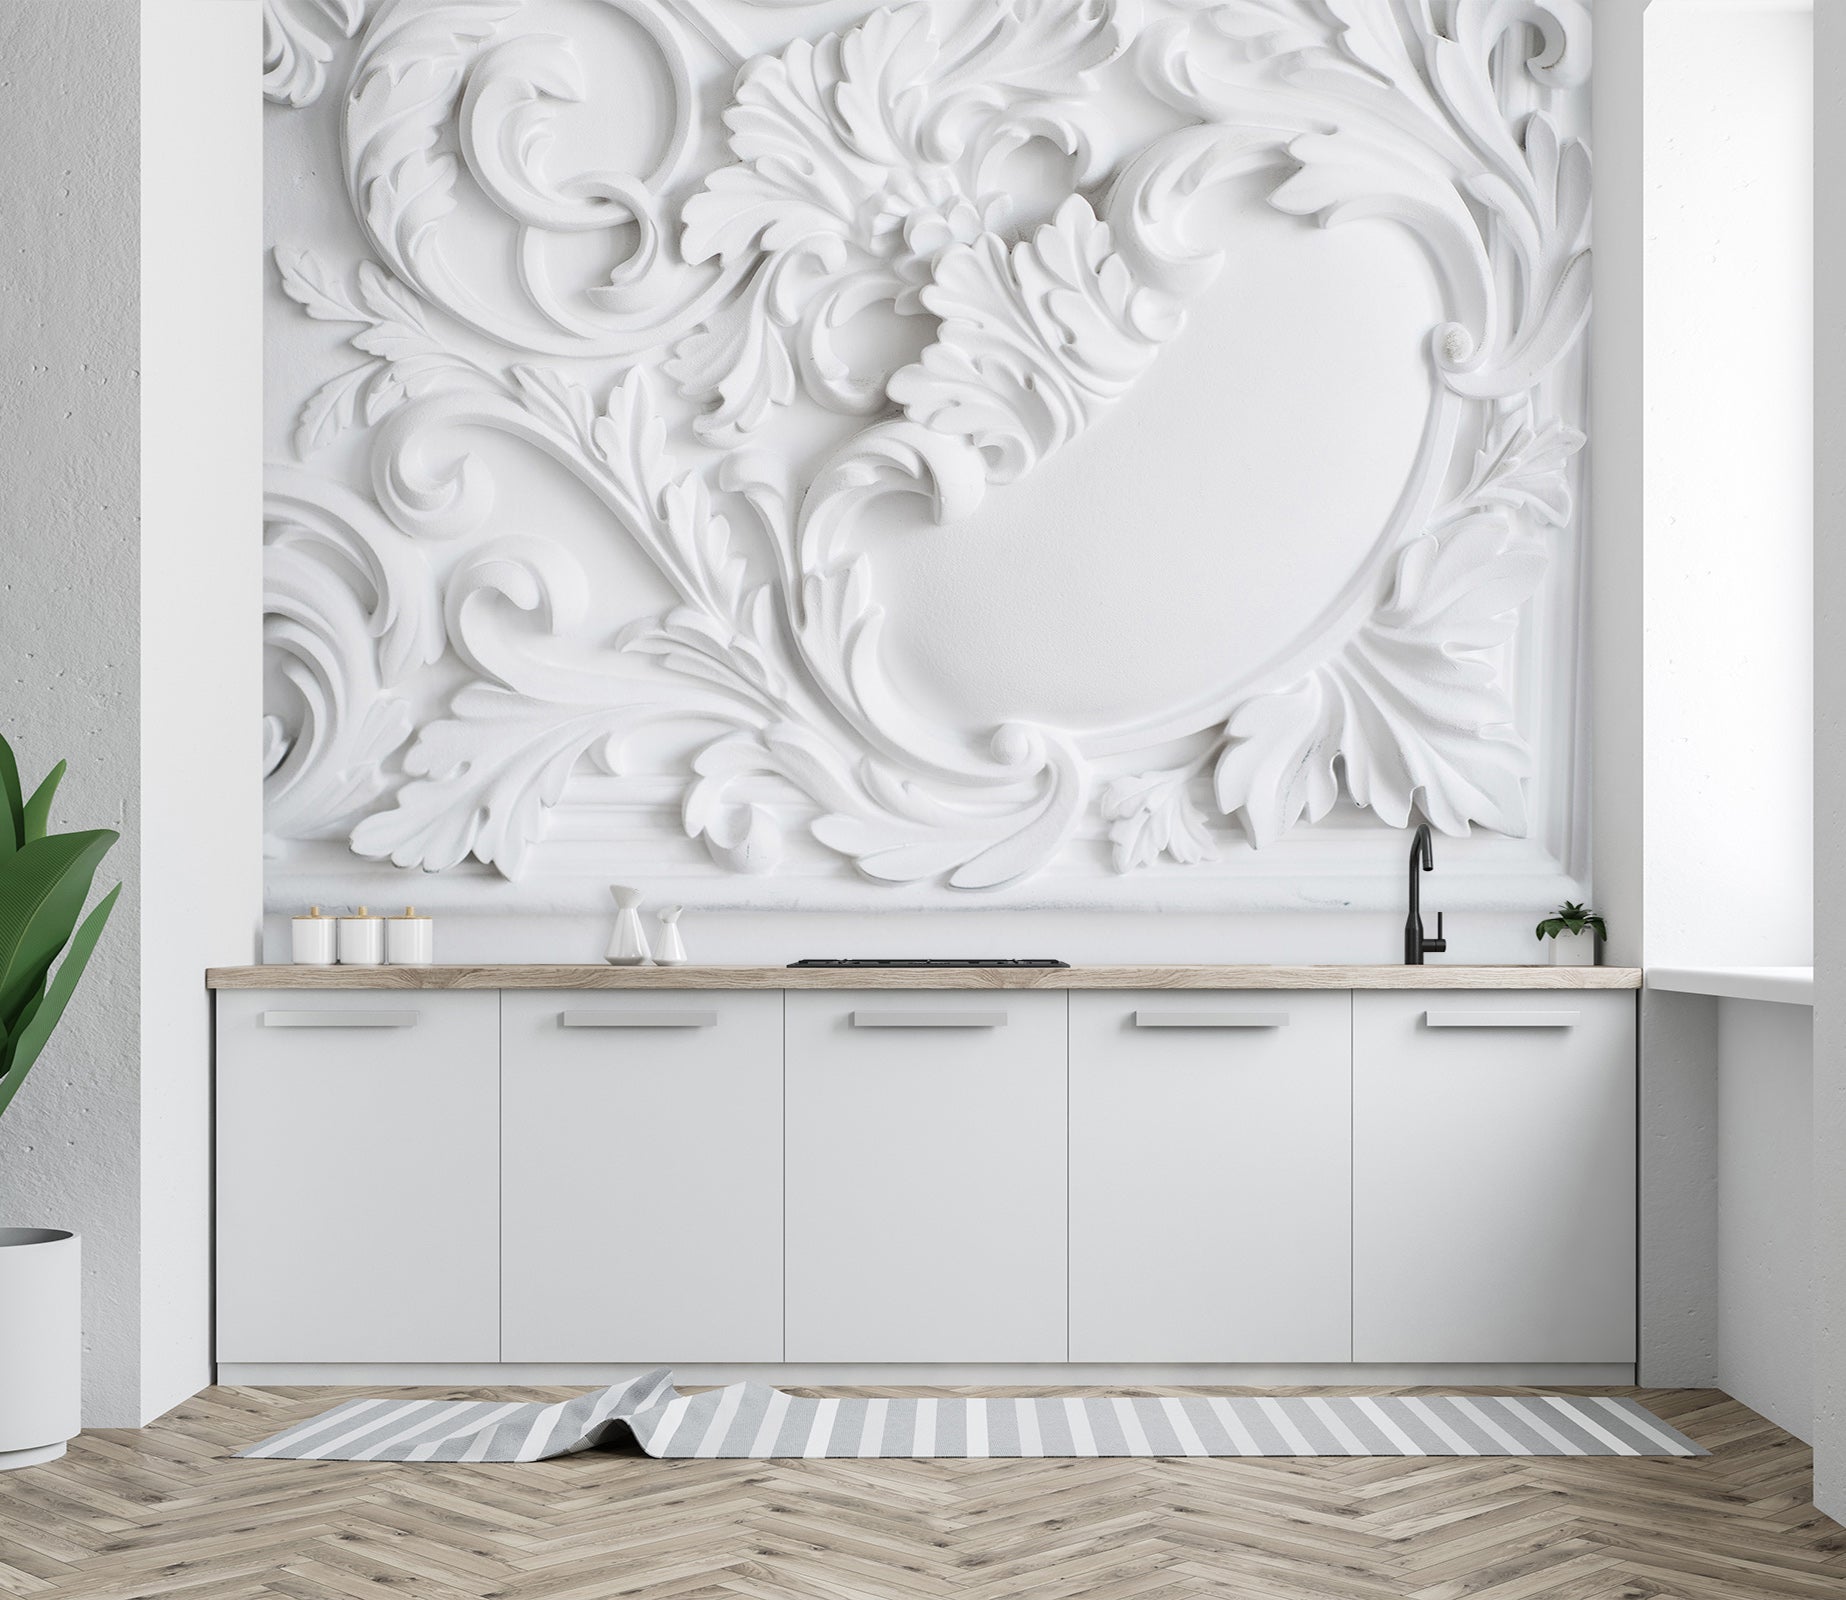 3D Carving Flowers 1423 Wall Murals